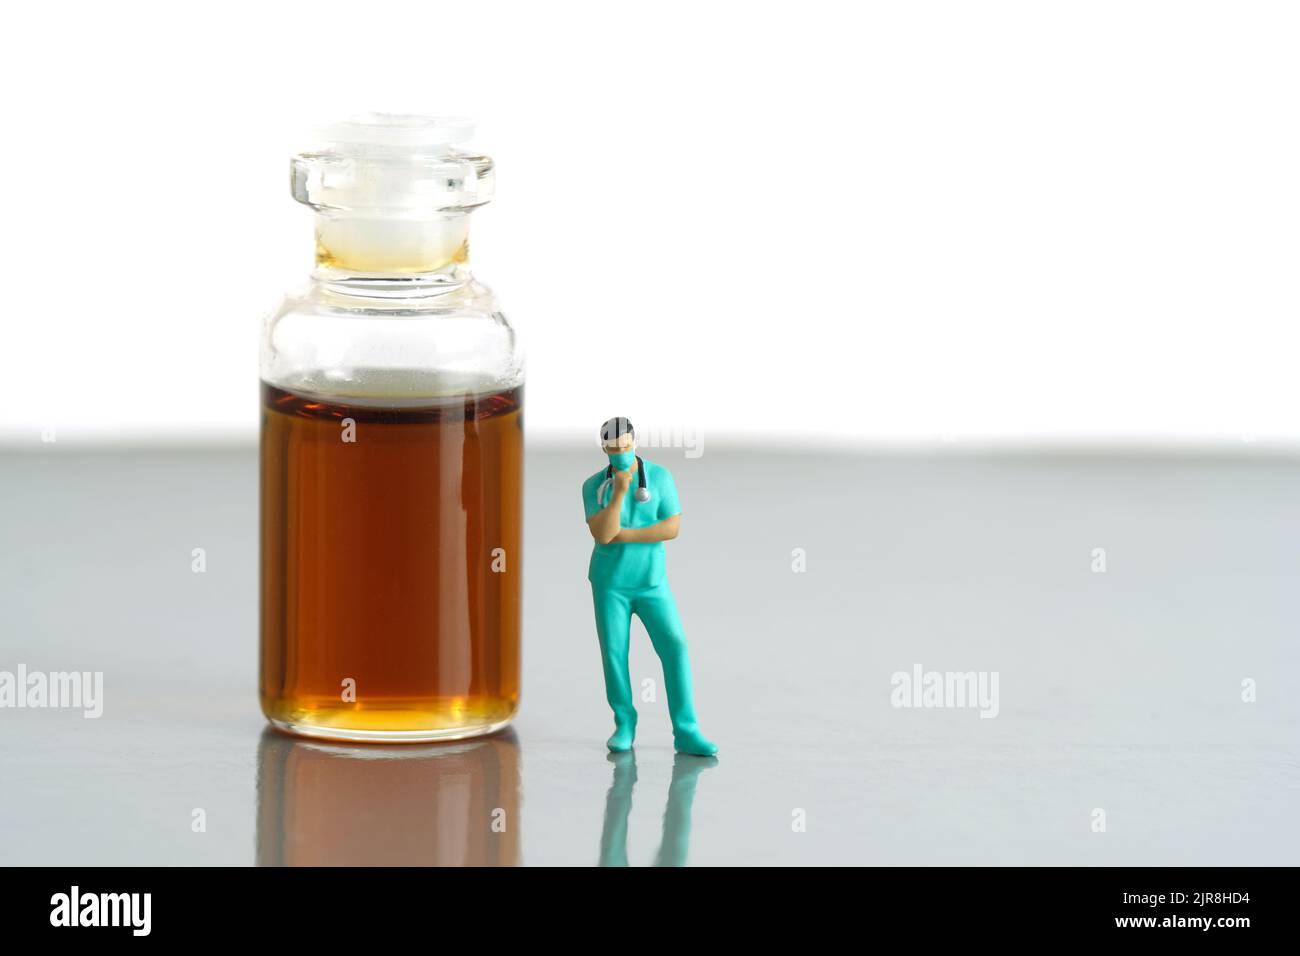 Miniature people toy figure photography. Urine test concept. A nurse standing in front of ampoule bottle with brown orange urine. Image photo Stock Photo